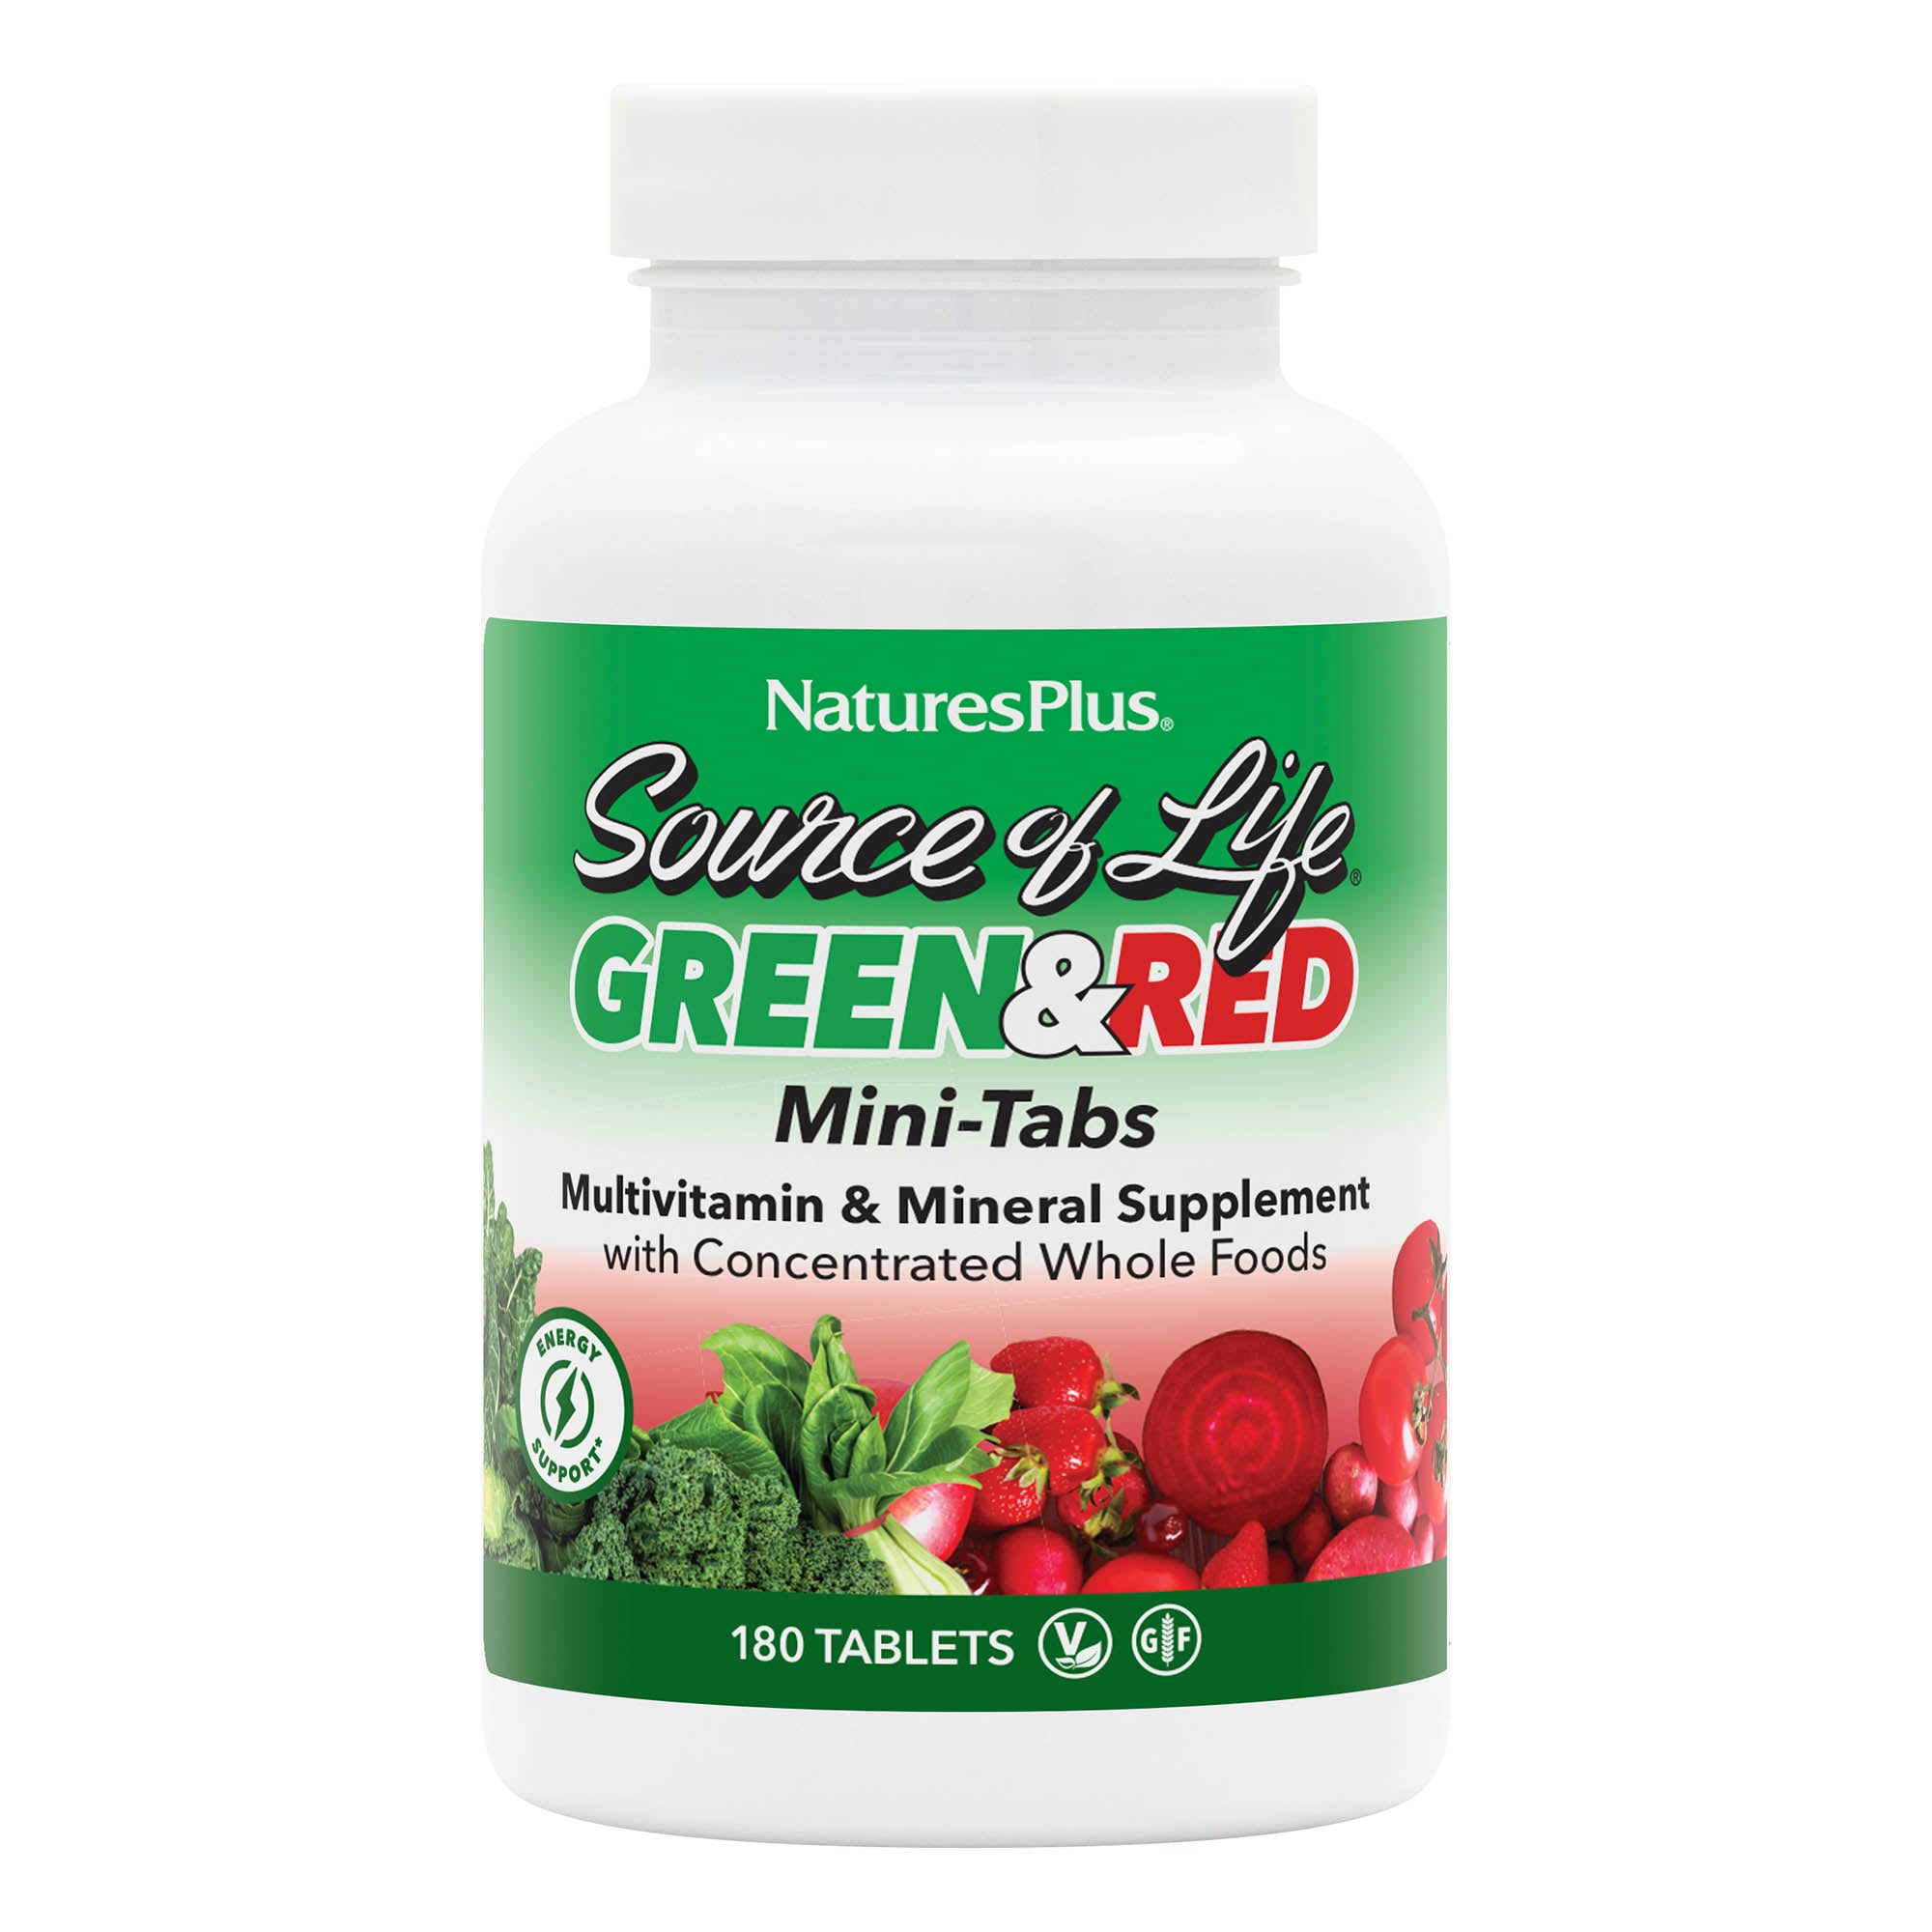 Source of Life® Green and Red Multivitamin Bi-Layered Mini-Tablets